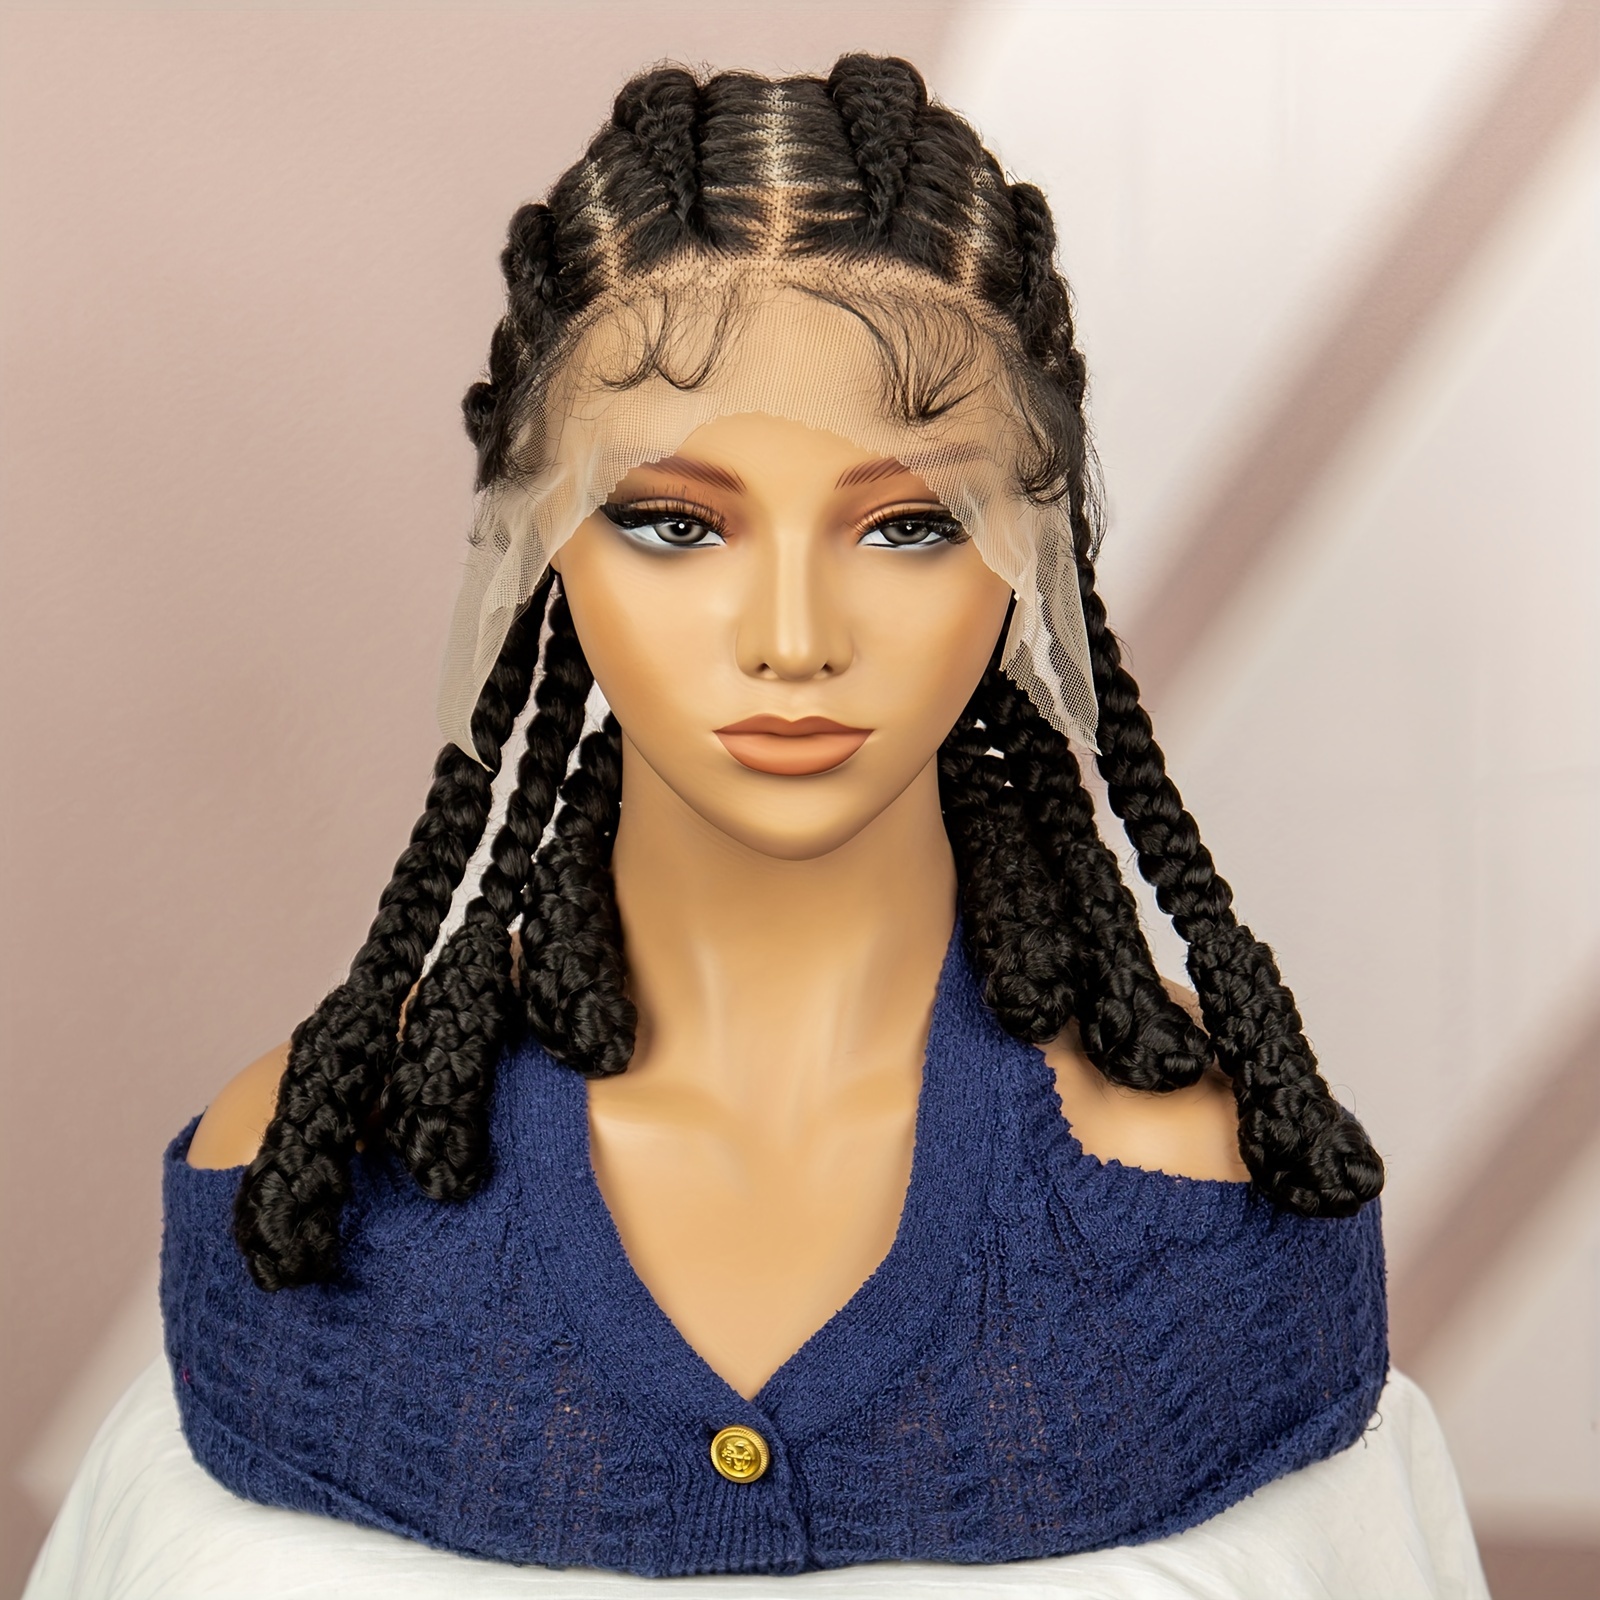 

Unisex Full Lace Braided Wig - Heat Resistant Synthetic Hair For Daily Wear, Versatile Curly Style Braided Wigs Curly Wigs For Women